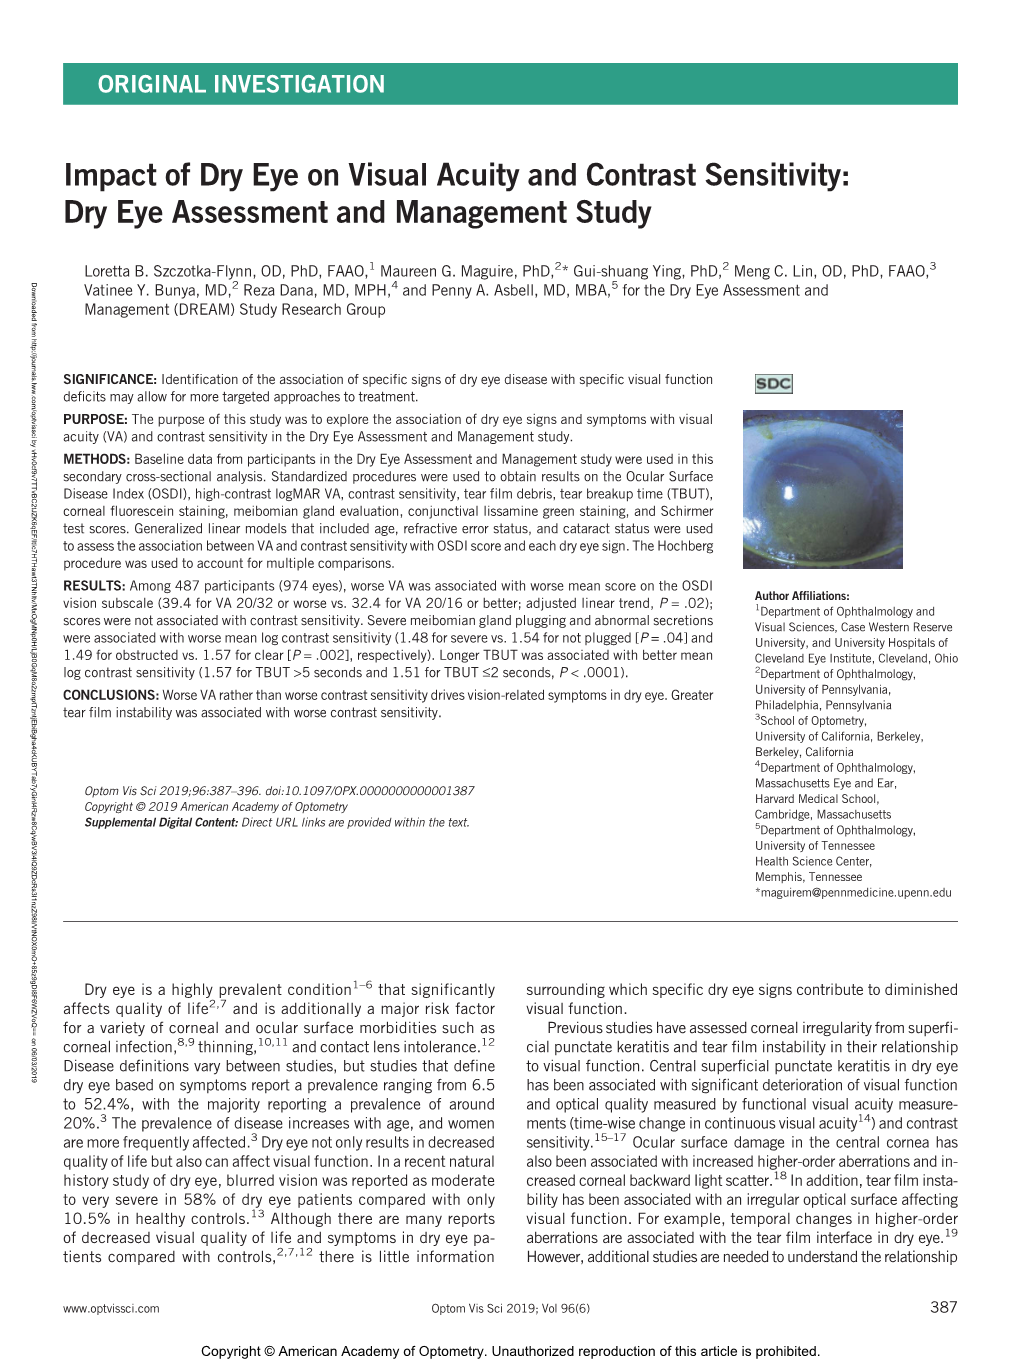 Impact of Dry Eye on Visual Acuity and Contrast Sensitivity